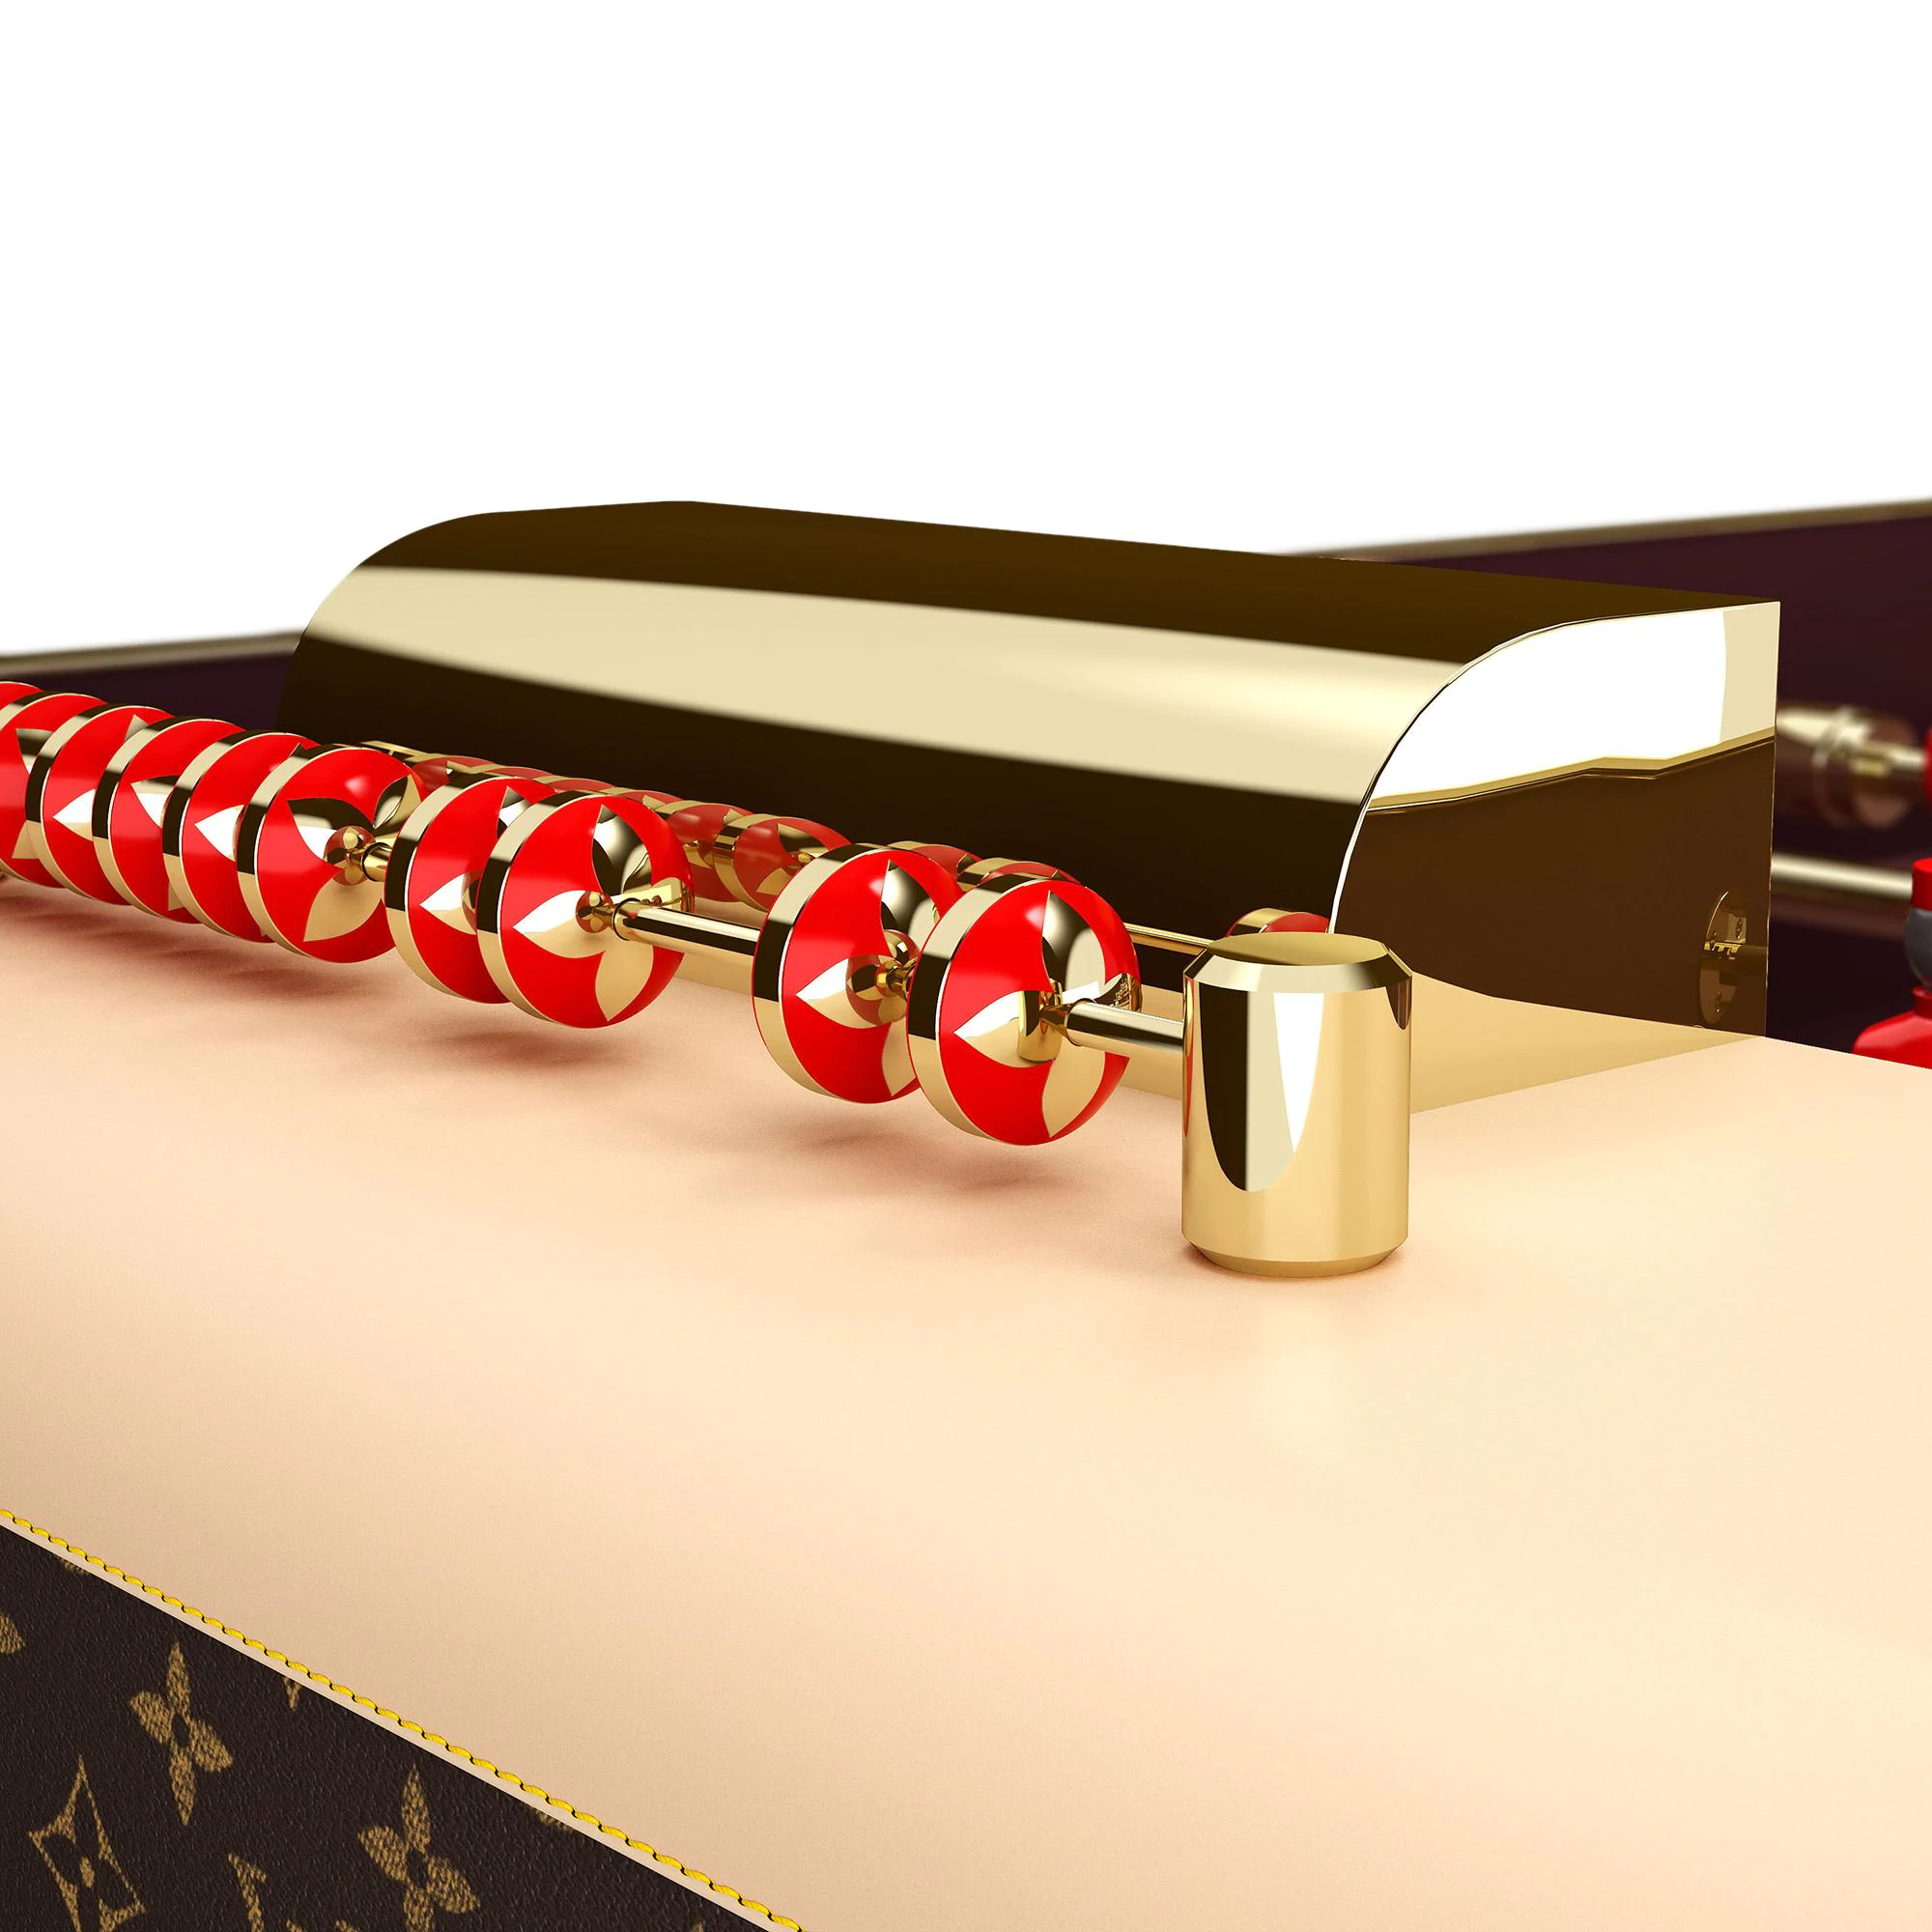 The Louis Vuitton Foosball Table Will Set You Back US$75,000